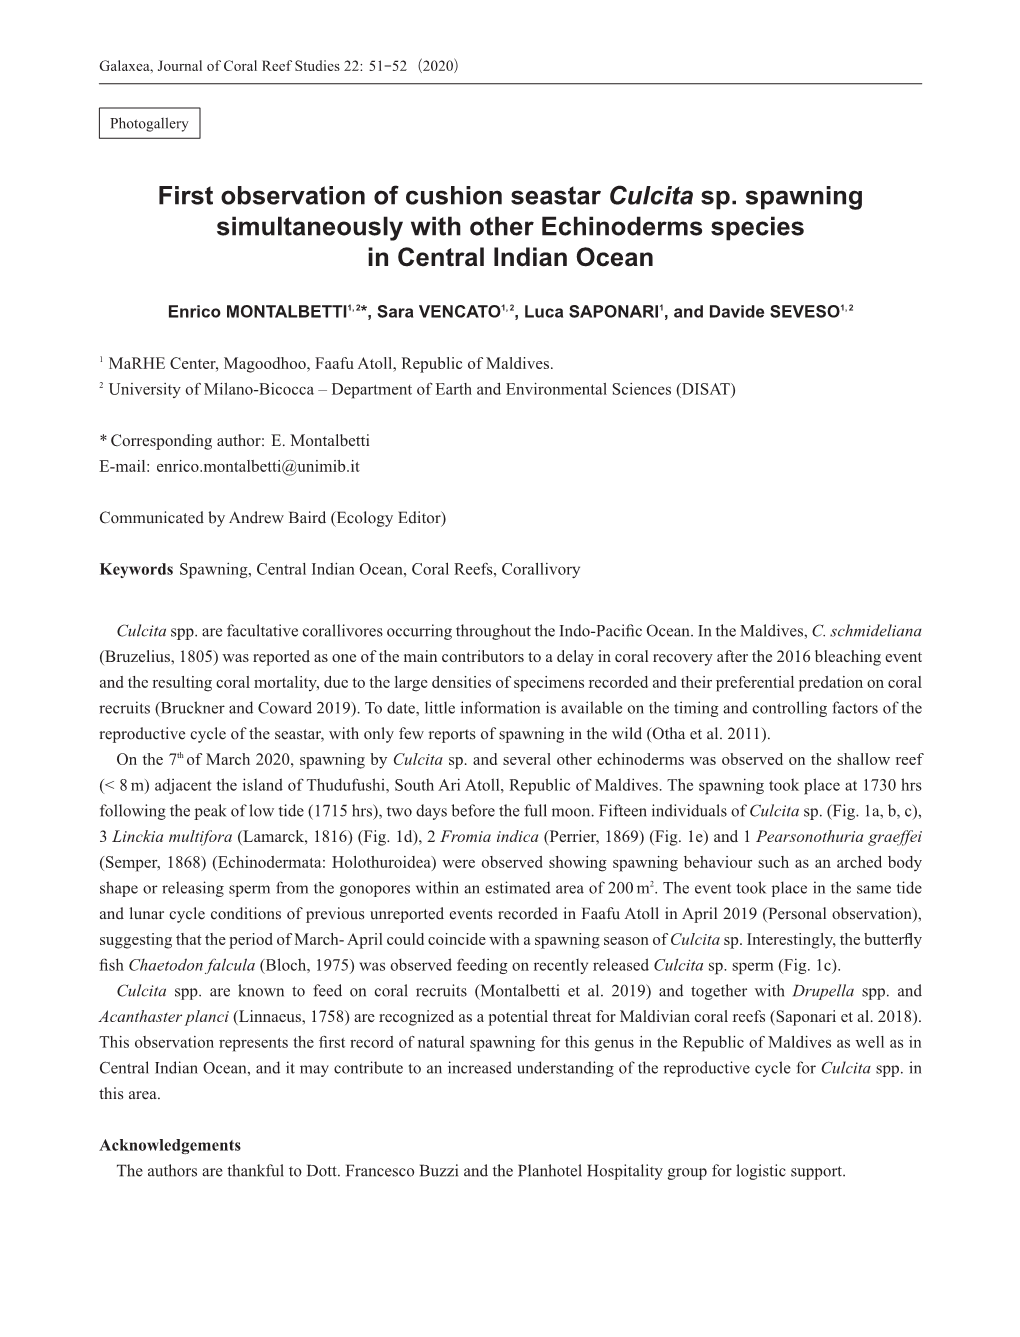 First Observation of Cushion Seastar Culcita Sp. Spawning Simultaneously with Other Echinoderms Species in Central Indian Ocean